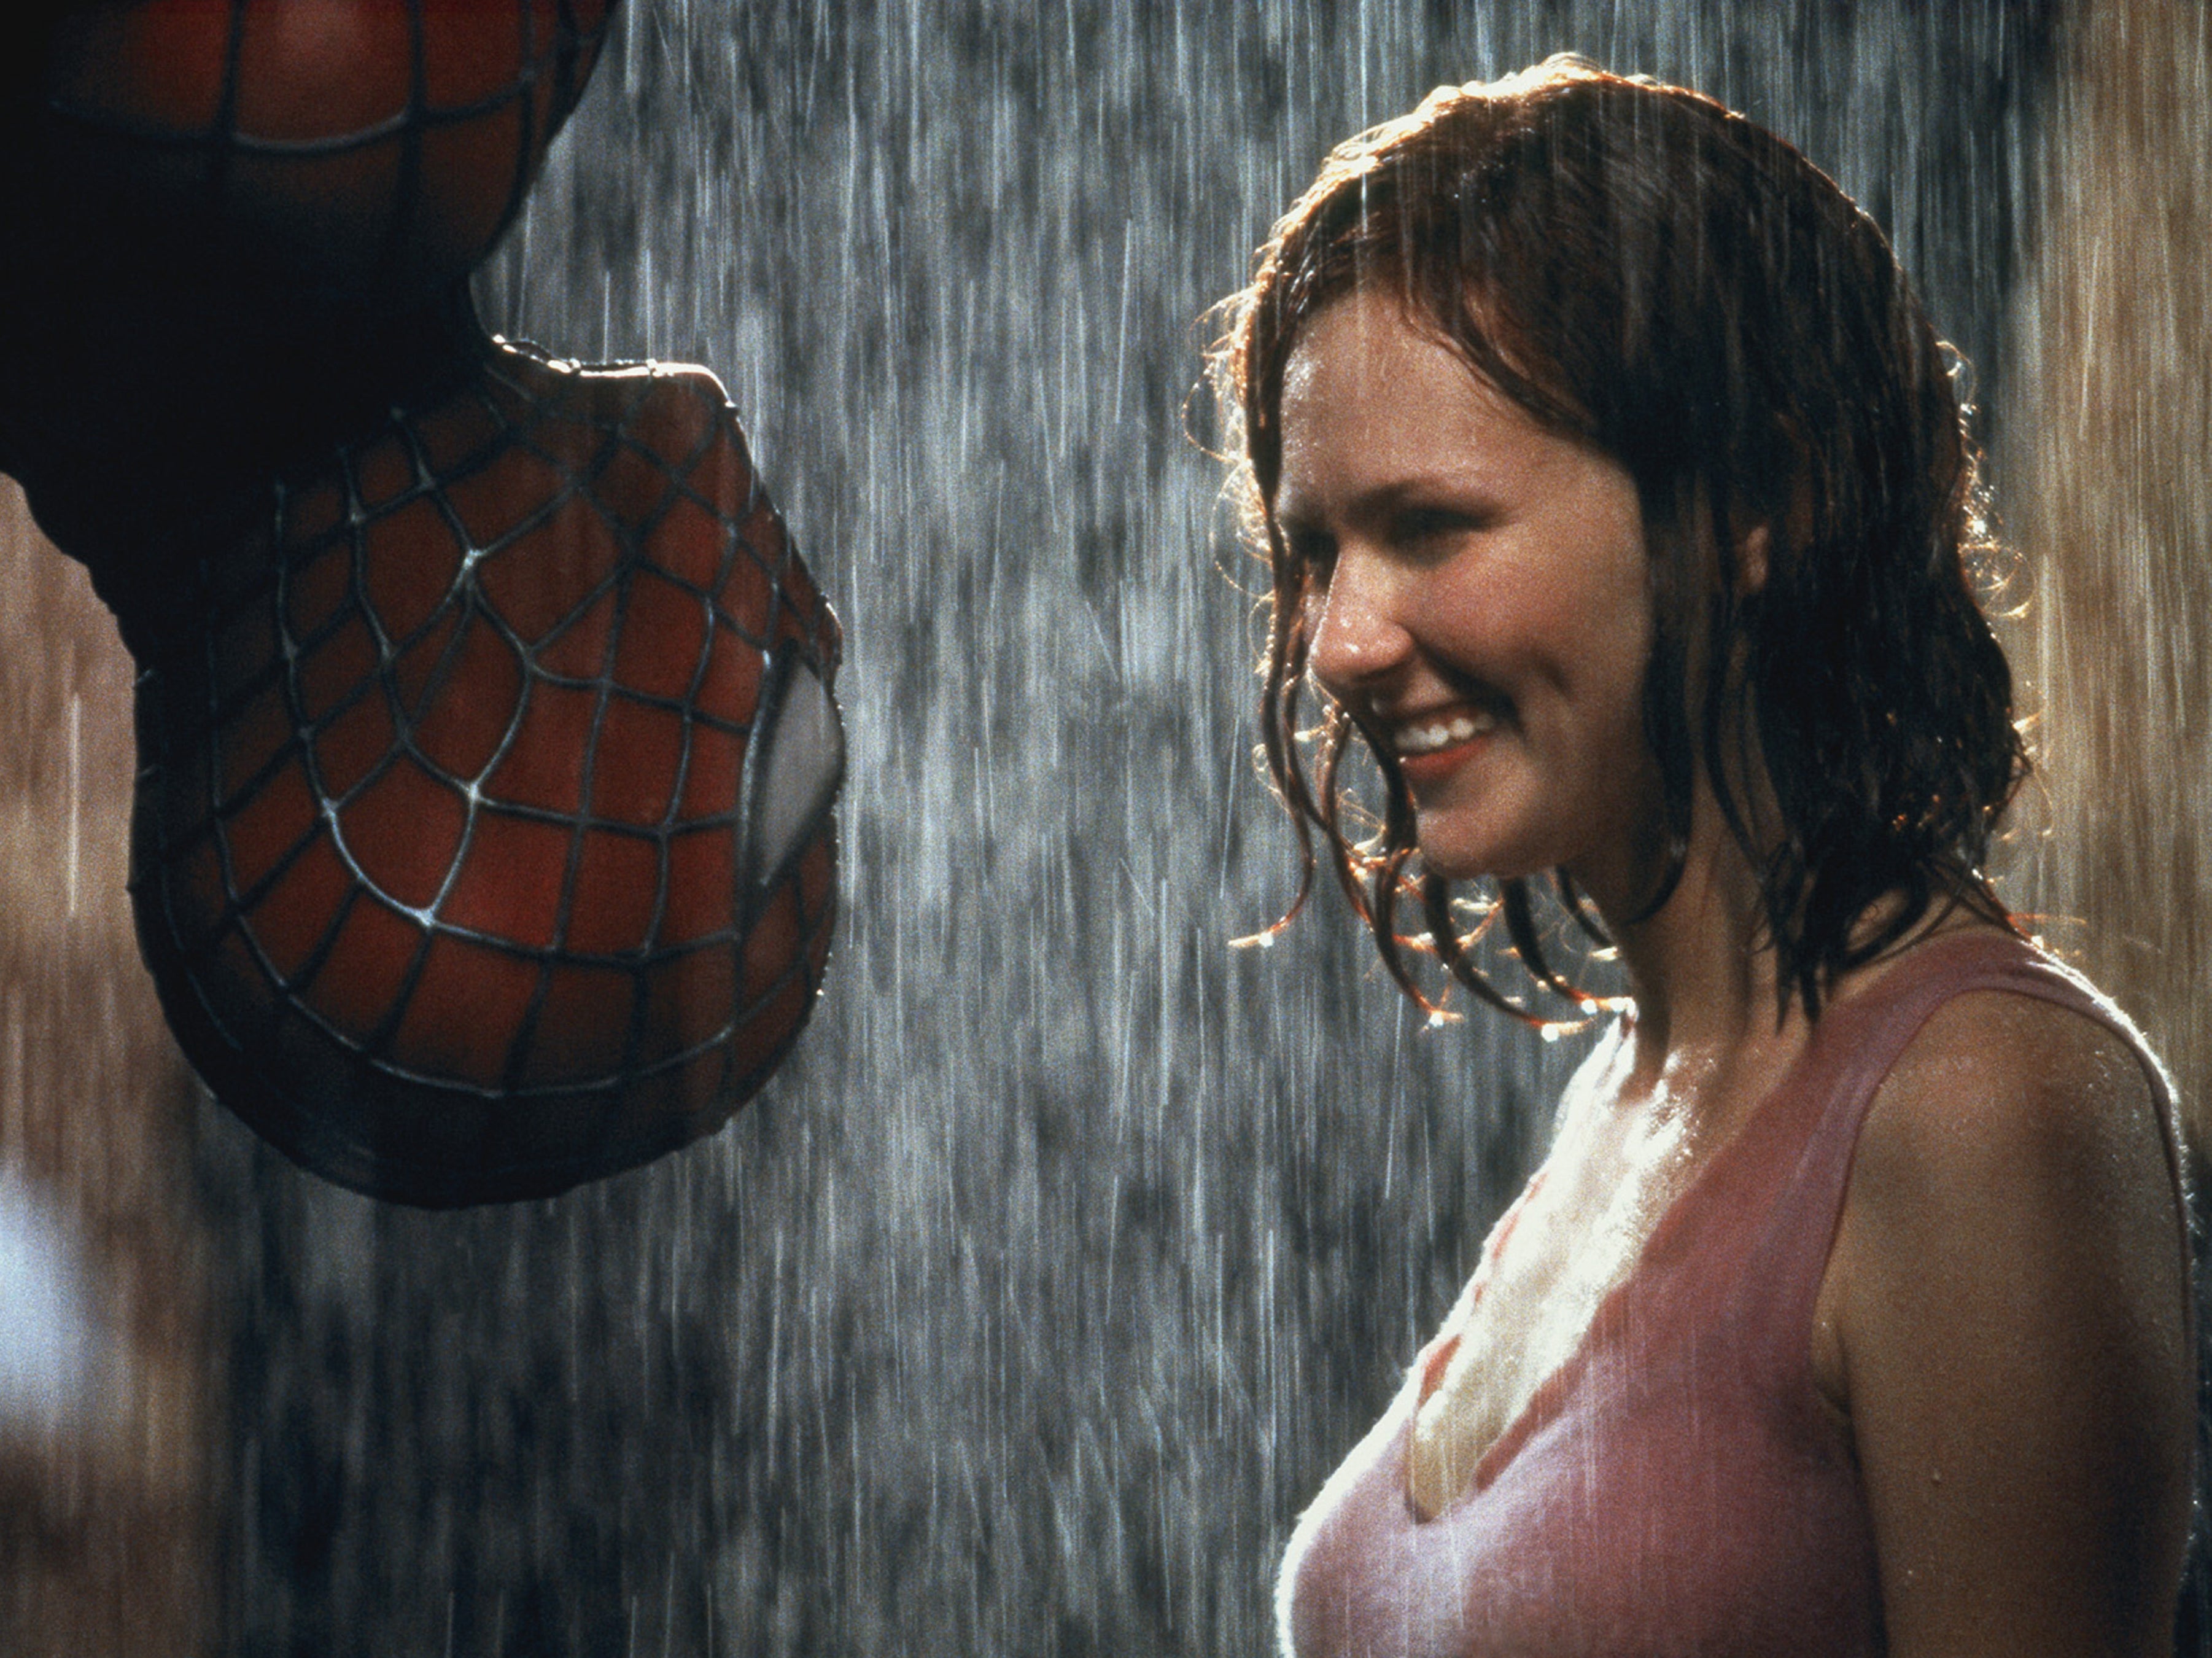 Web-slingin’ in the rain: Toby Maguire and Kirsten Dunst in the 2002 film ‘Spider-Man'